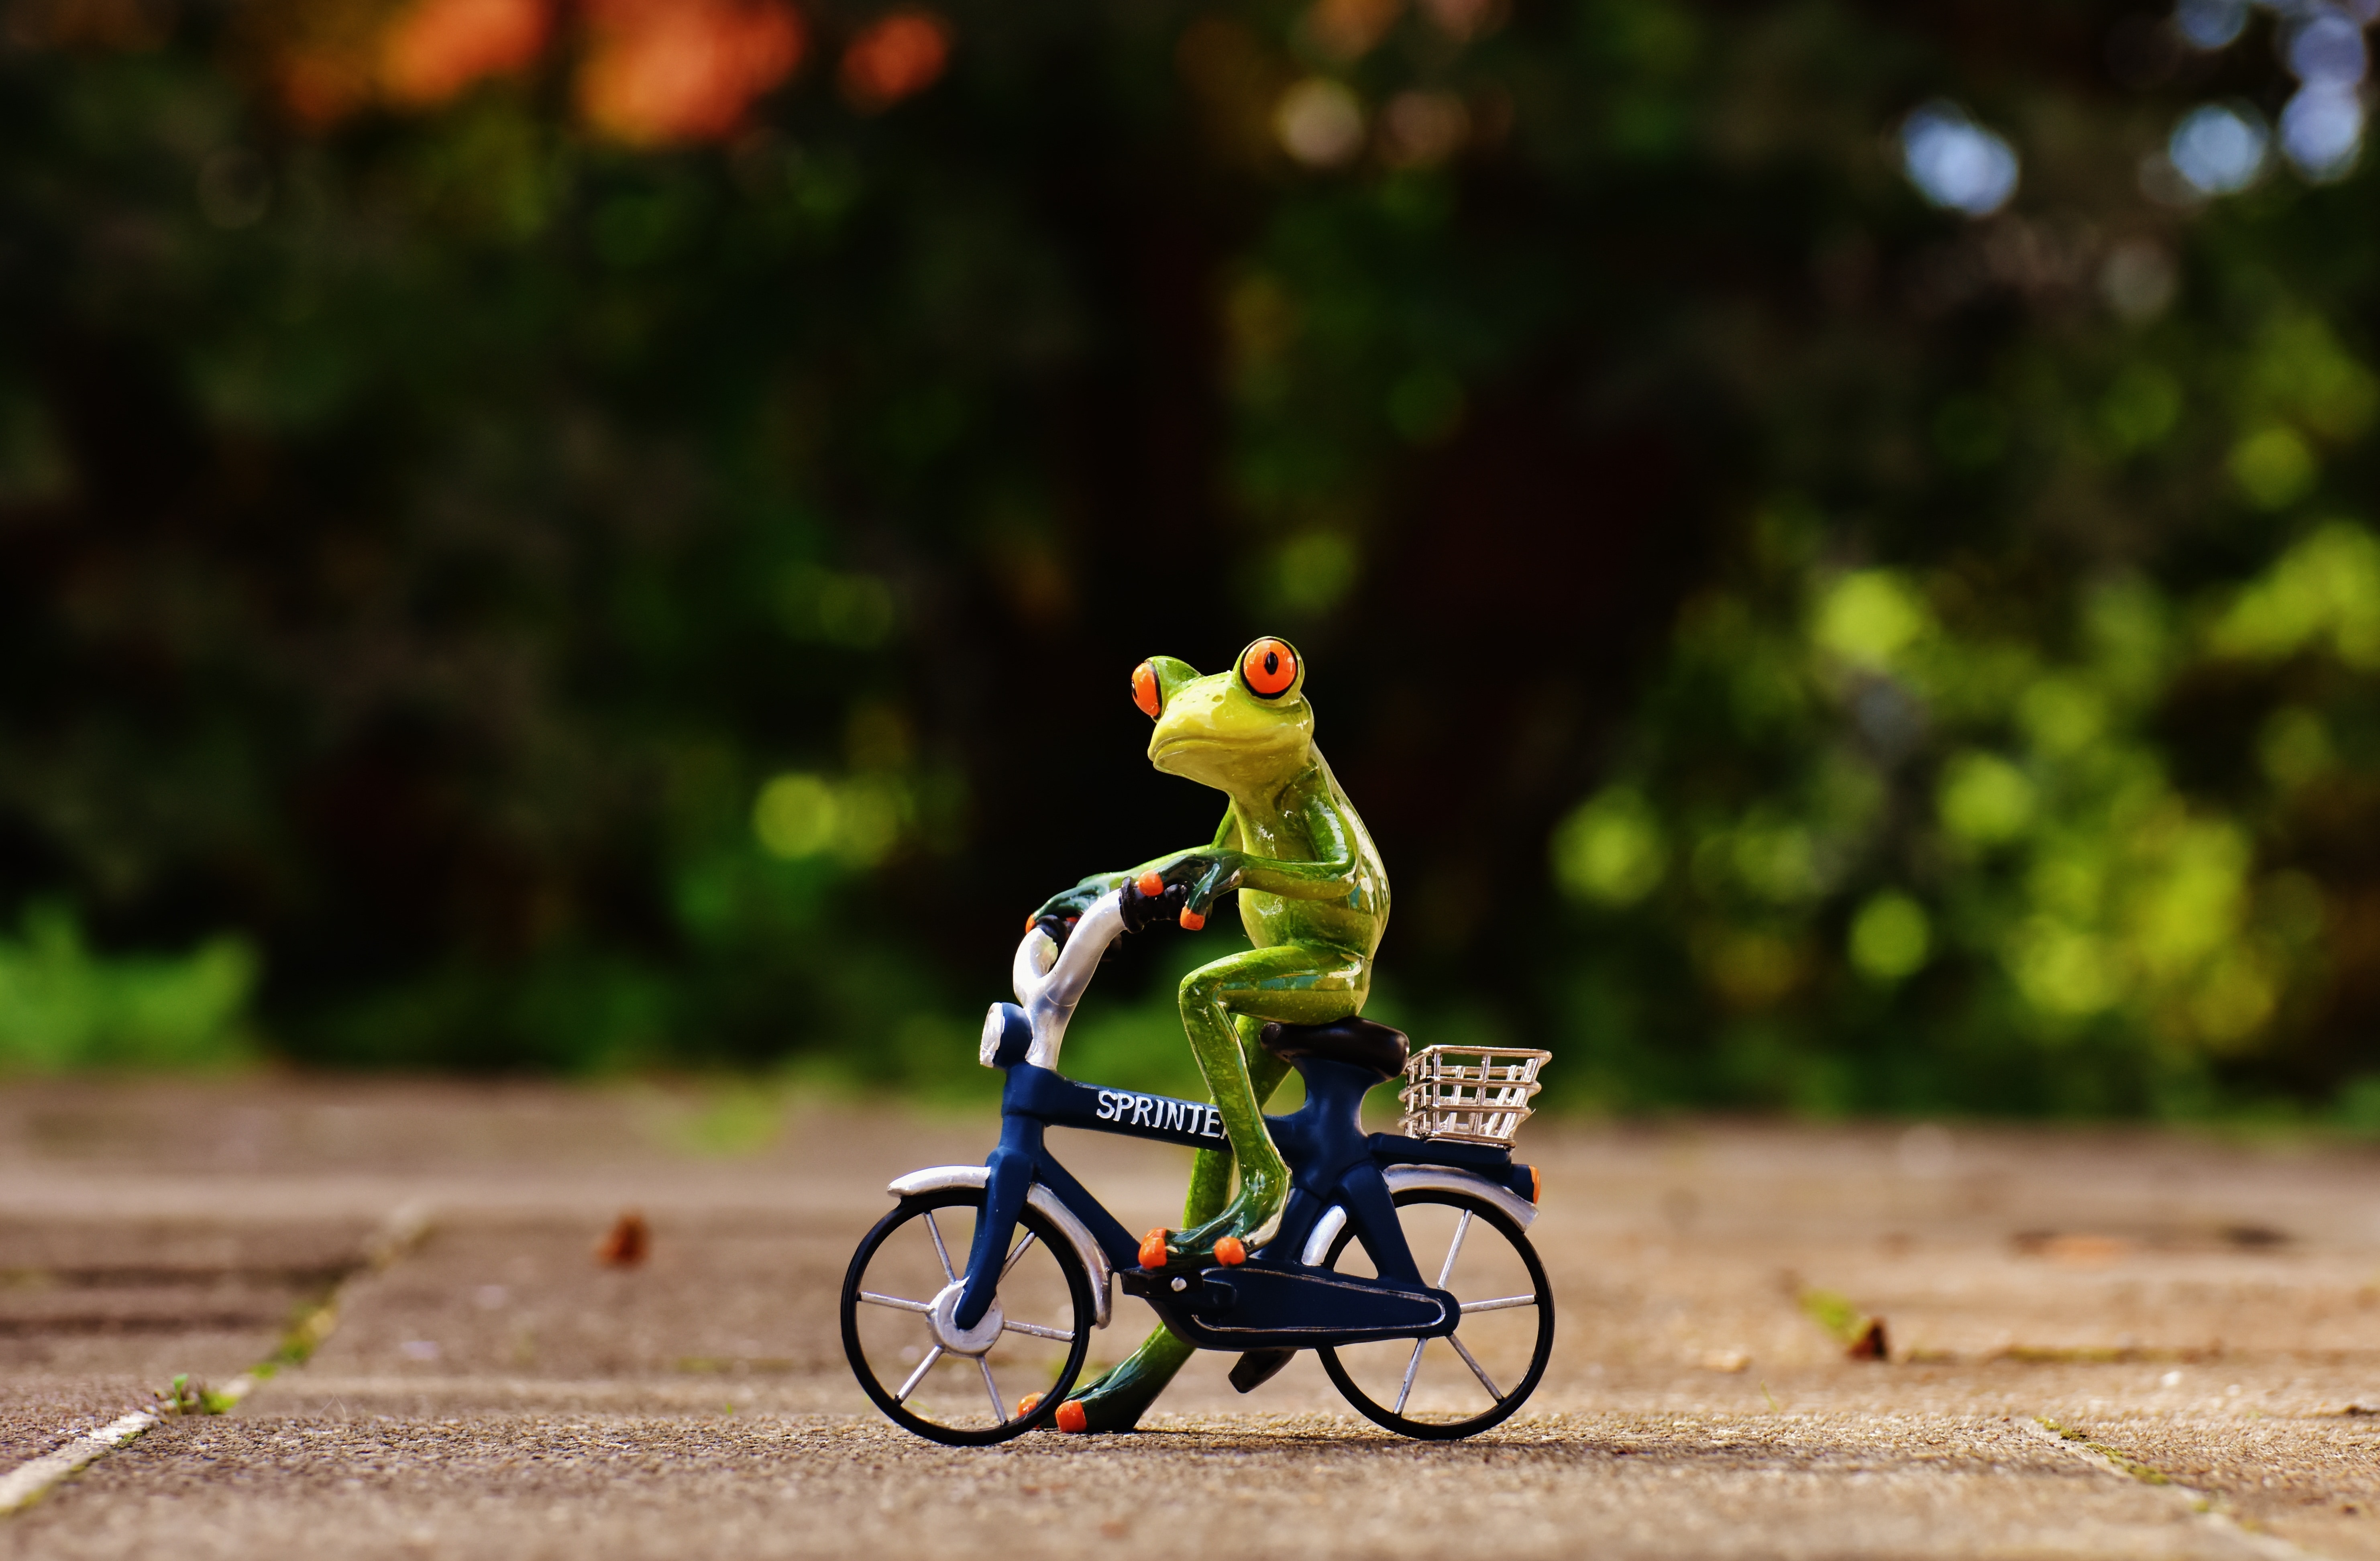 frog riding a bike toy